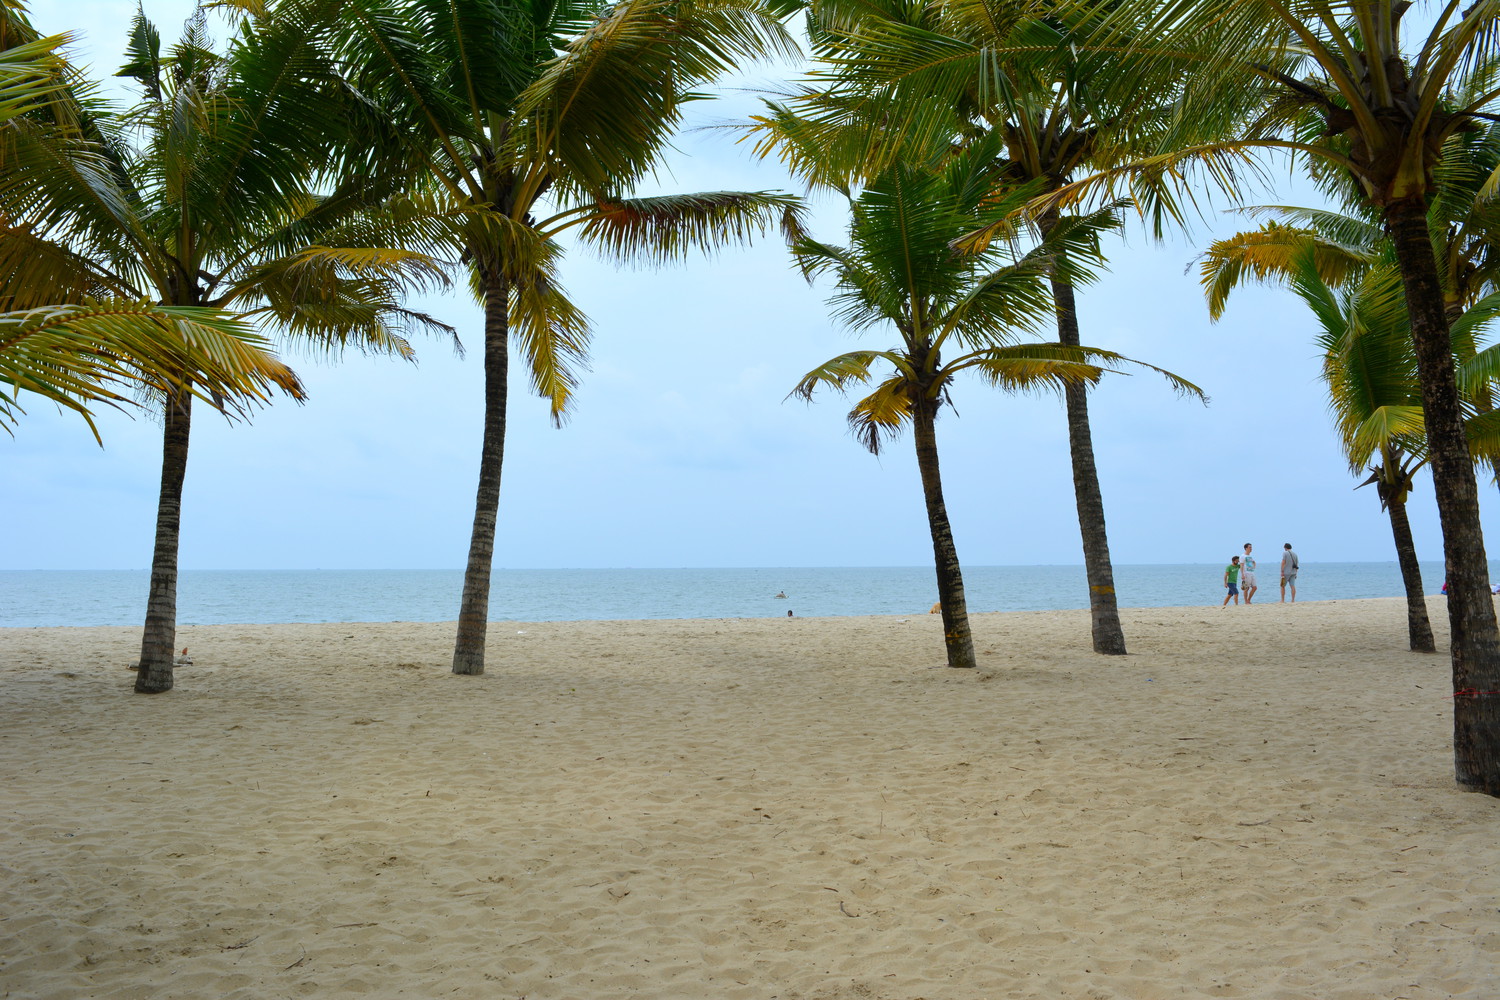 Beach with coconut palm trees with a few people, the sea, and the sky visible behind the trees